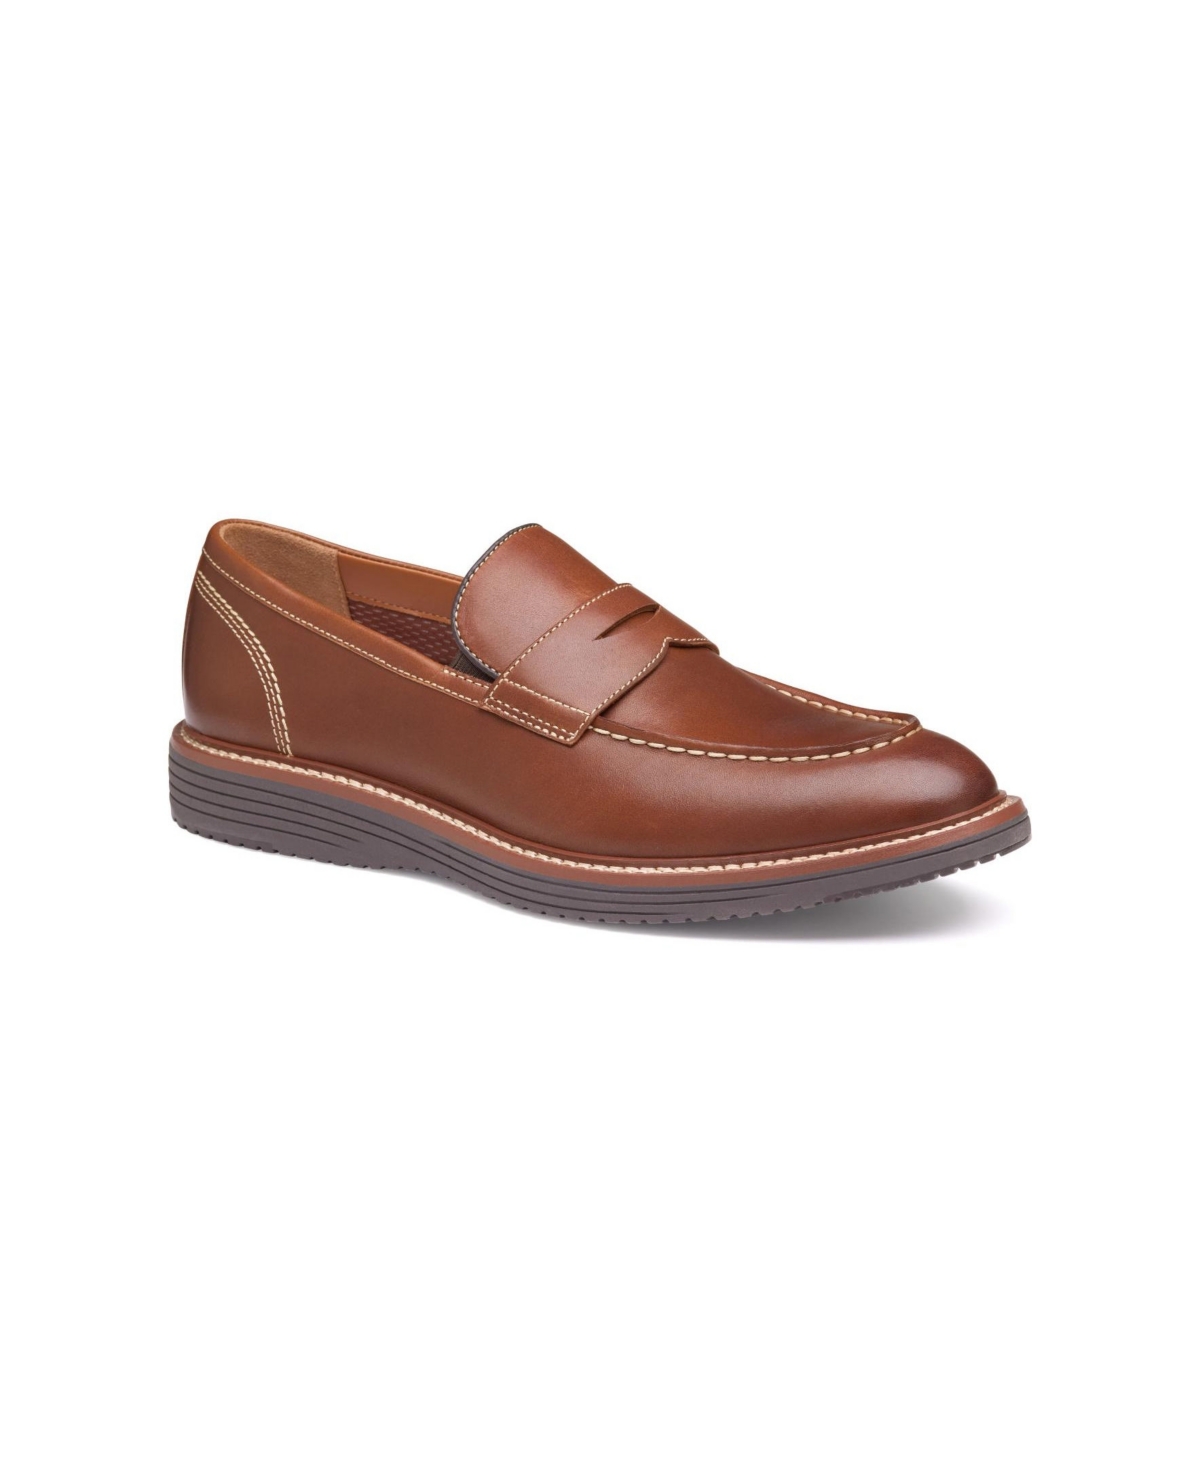 Johnston & Murphy Men's Upton Leather Penny Loafers In Tan Full Grain Leather